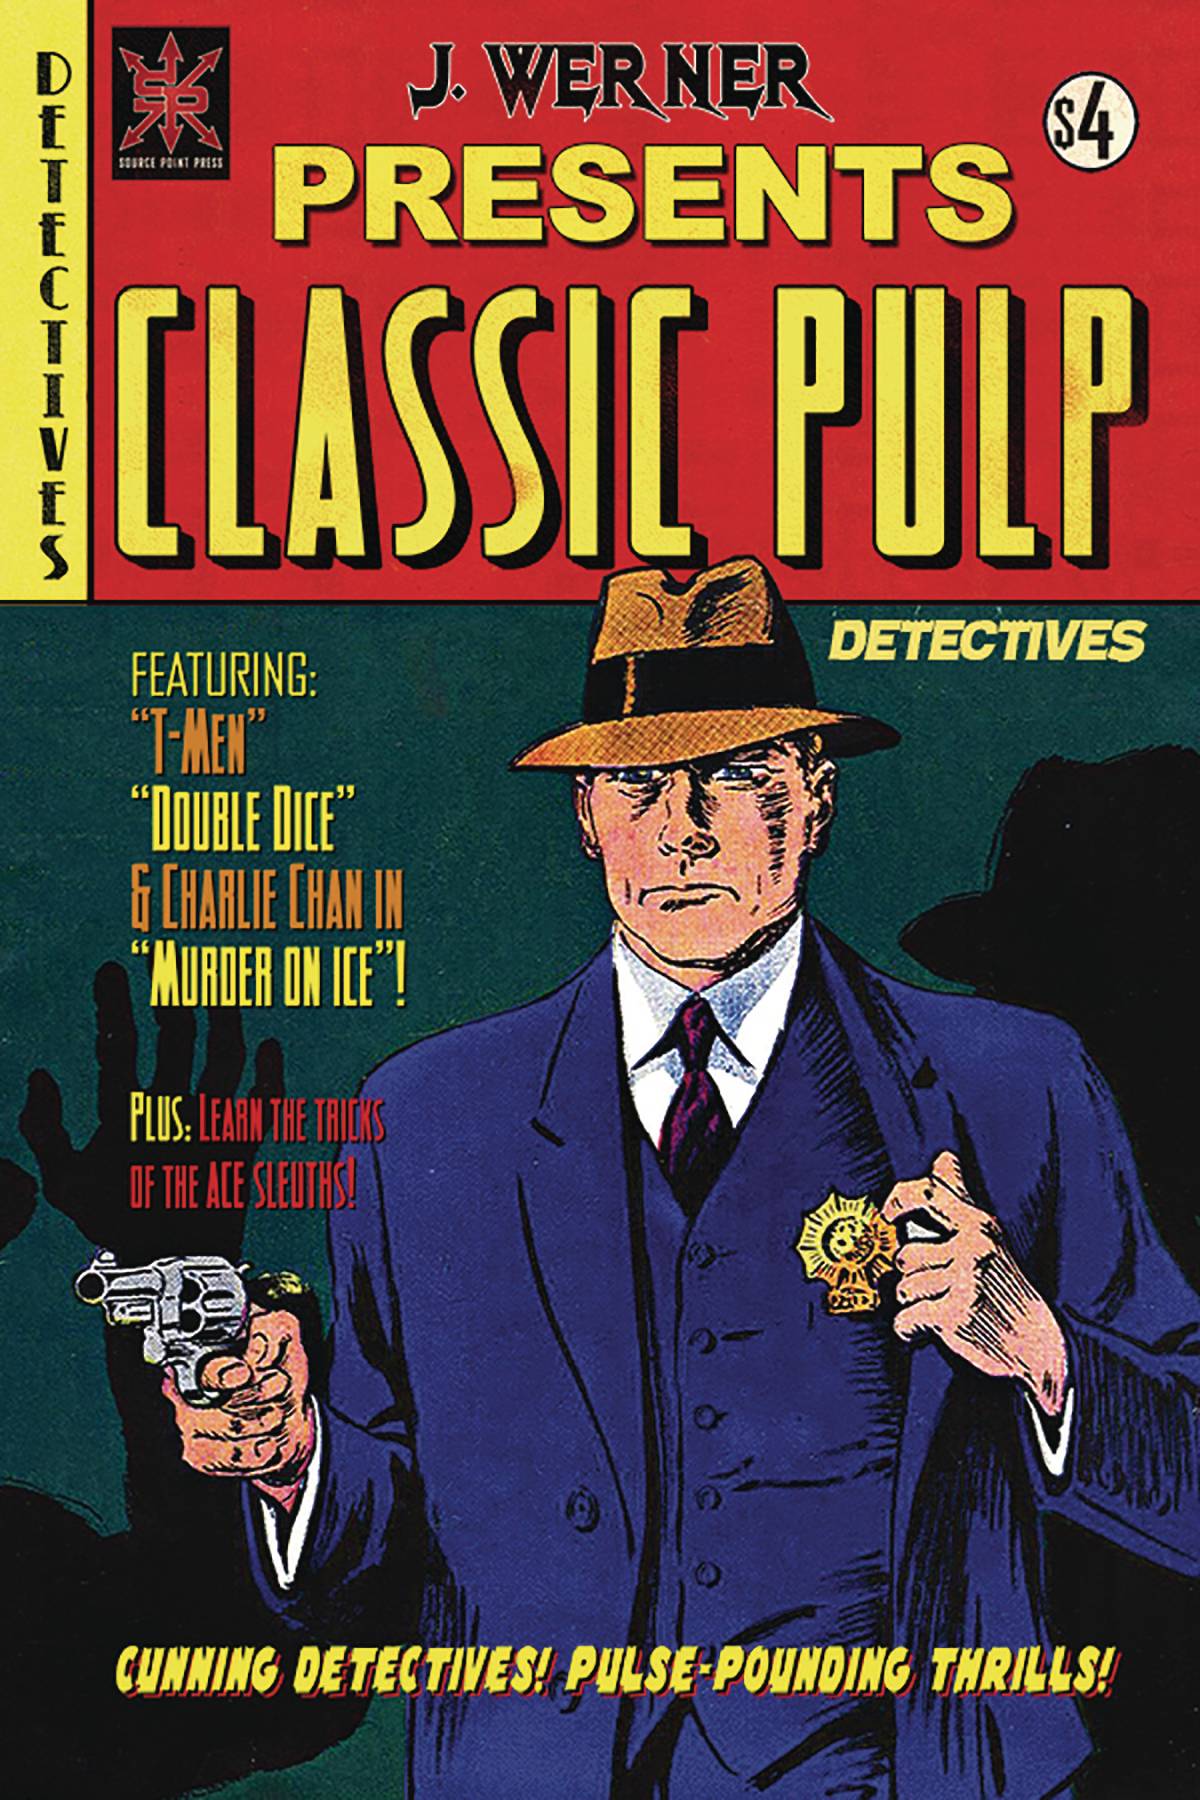 CLASSIC PULP DETECTIVES ONE SHOT